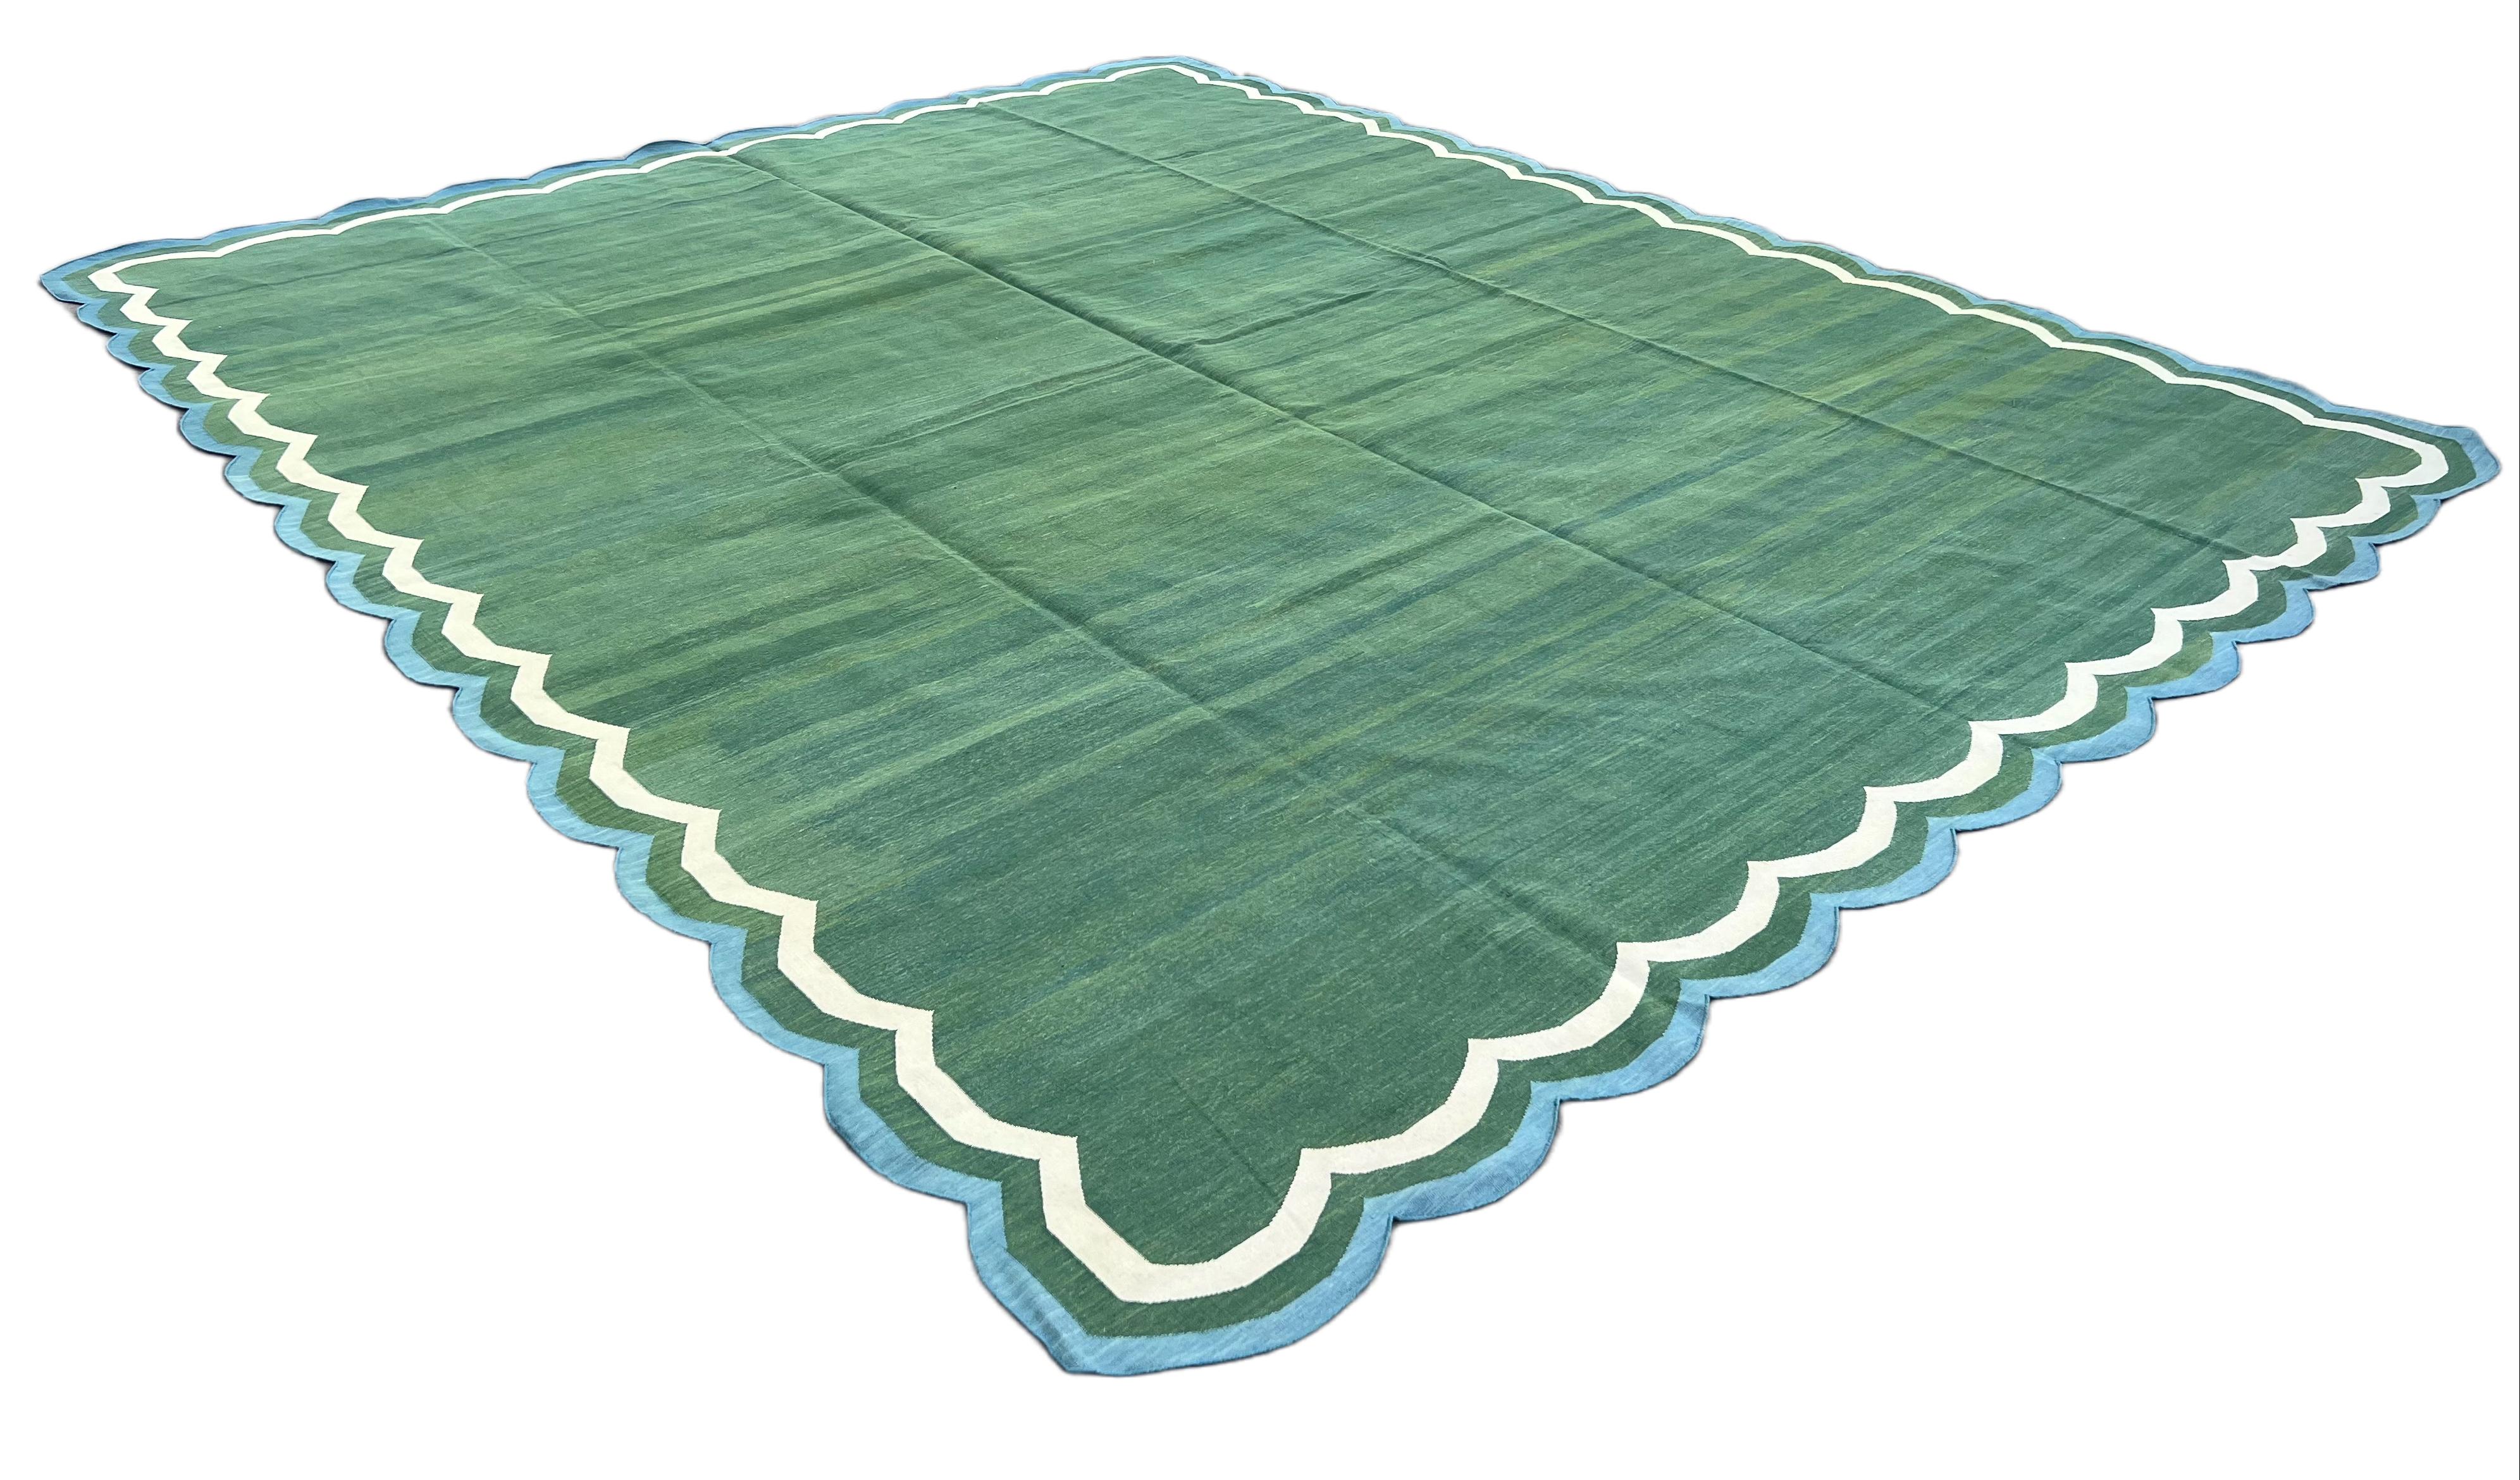 Cotton Vegetable Dyed Forest Green and Teal Blue 4 Sided Indian Scalloped Rug - 12'x15'
These special flat-weave dhurries are hand-woven with 15 ply 100% cotton yarn. Due to the special manufacturing techniques used to create our rugs, the size and